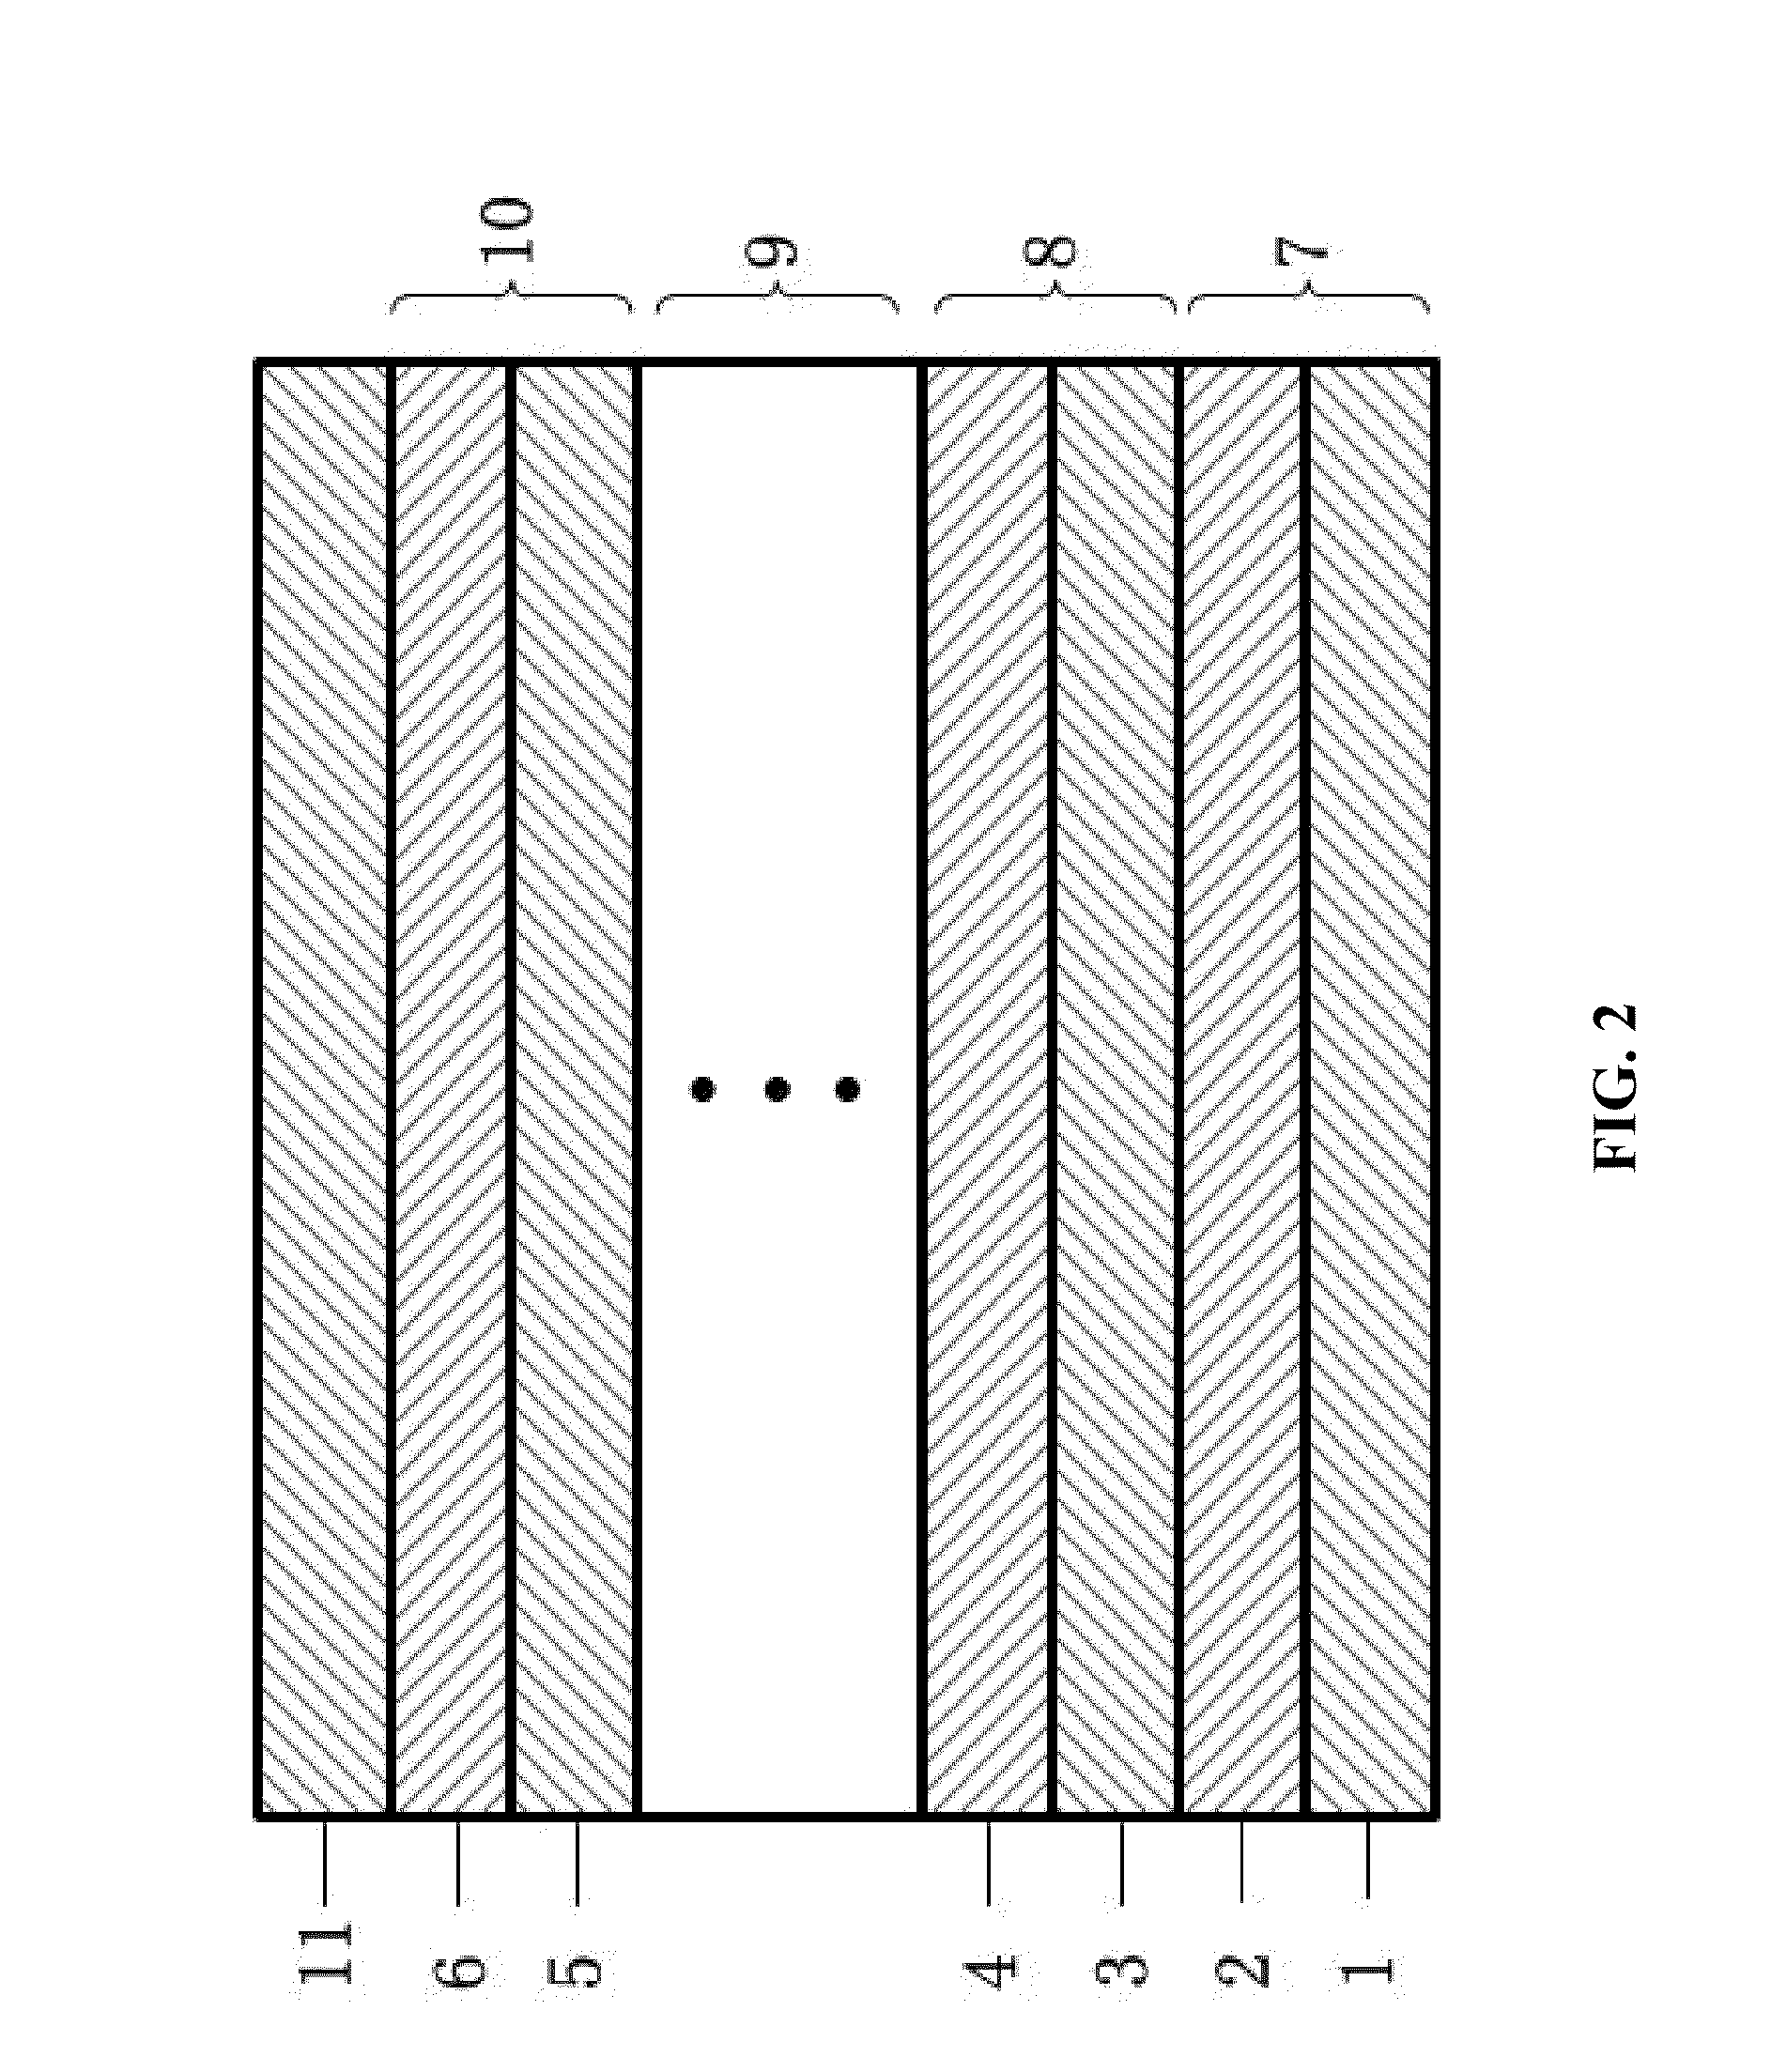 Multi-layer phase change material